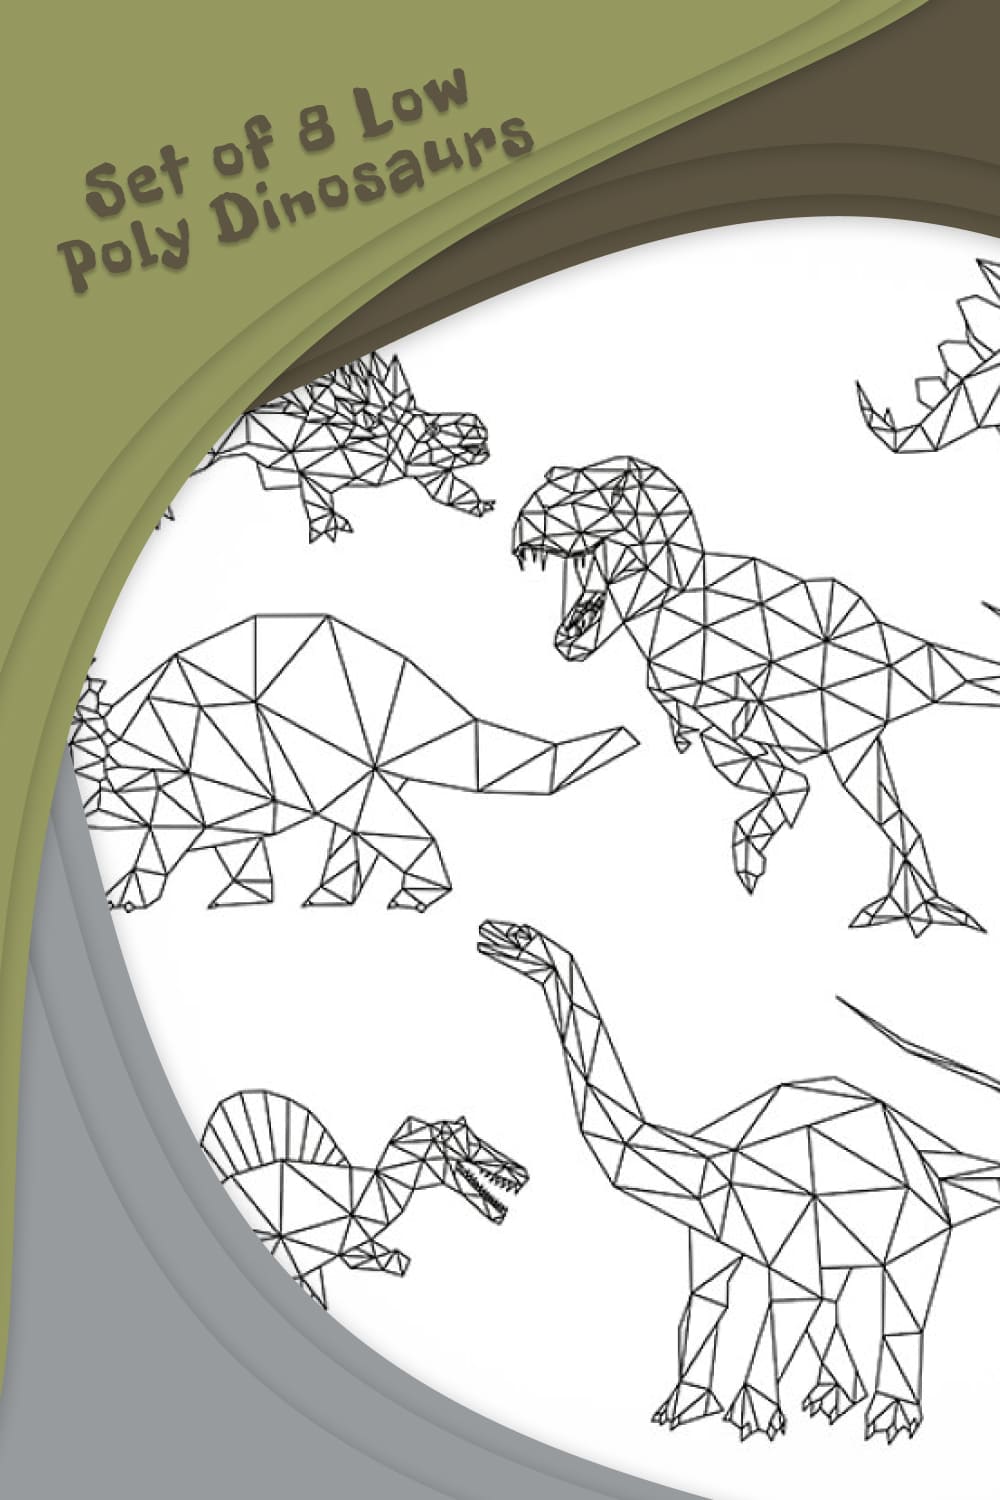 Set of 8 Low Poly Dinosaurs pinterest image.